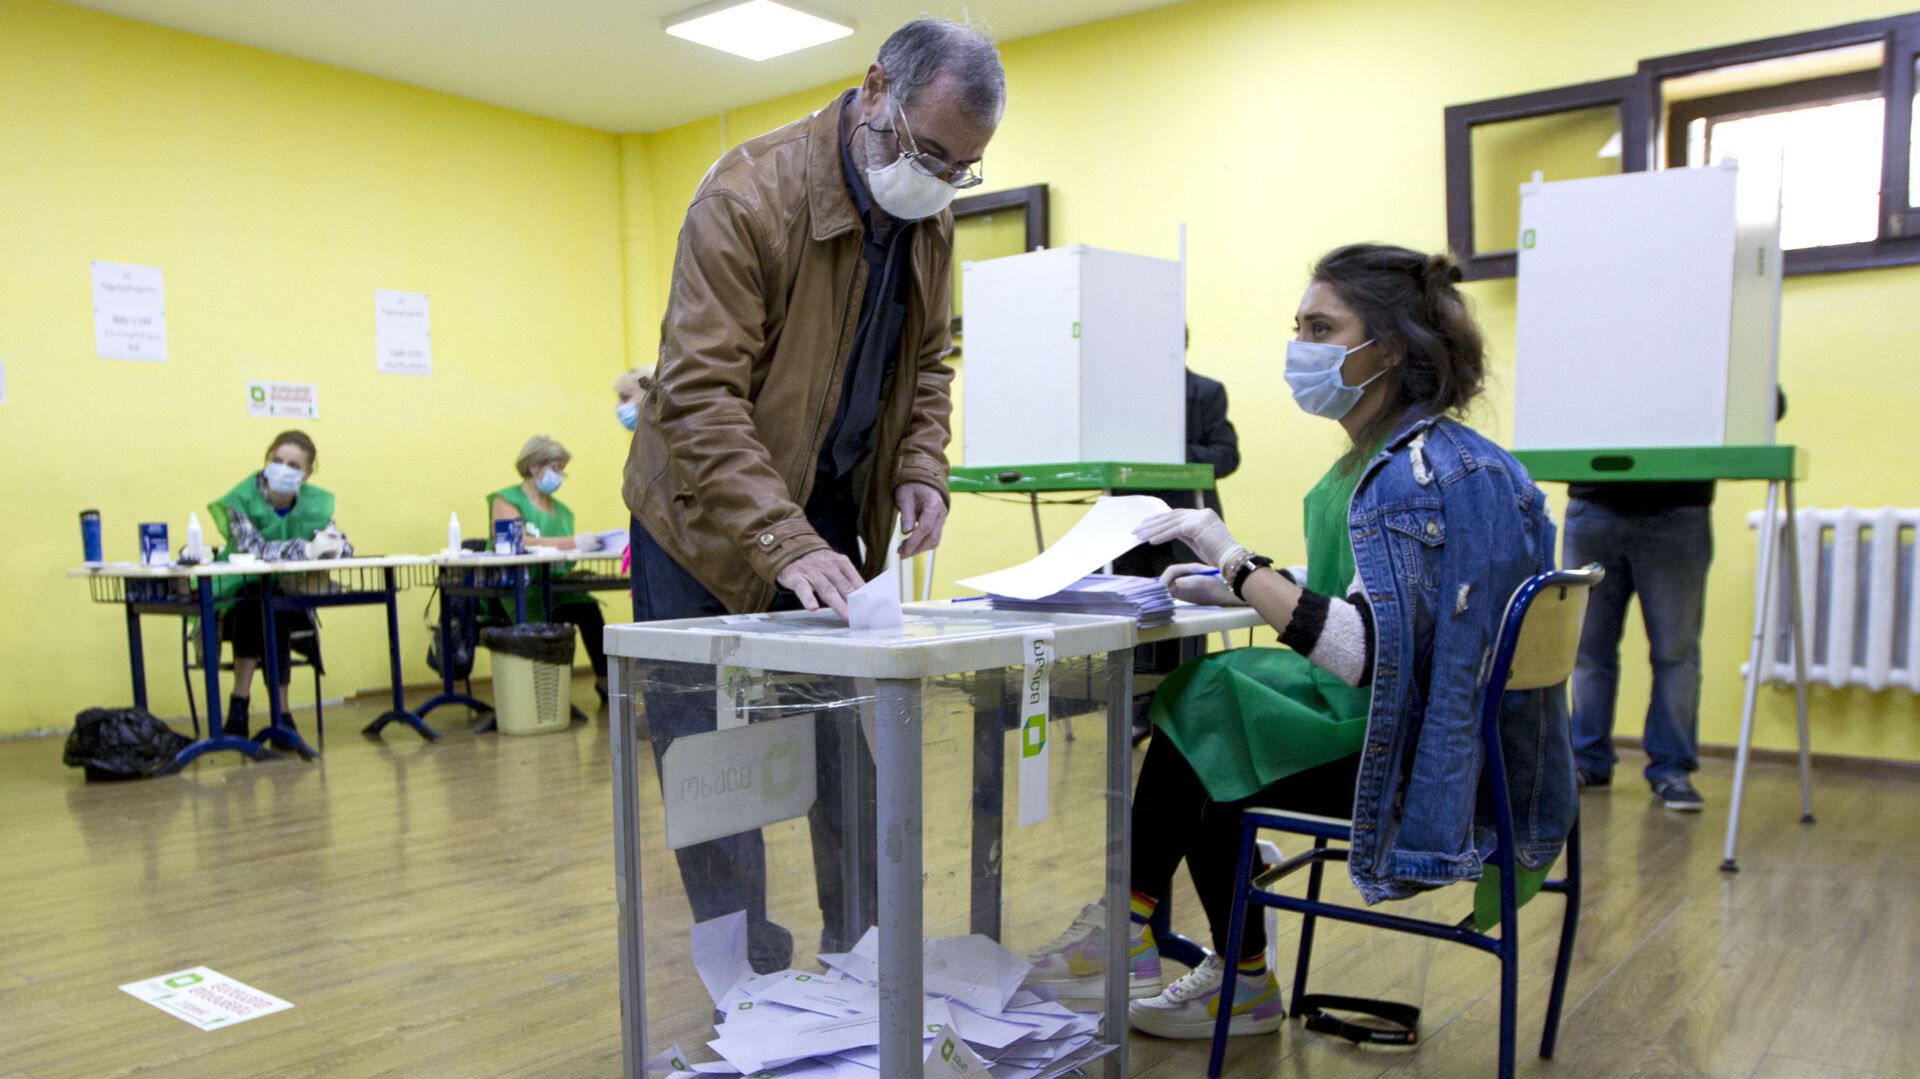 A man wearing a face mask to help curb the spread of the coronavirus, casts his ballot at a polling station during the parliamentary elections in Tbilisi, Georgia, Saturday, Oct. 31, 2020. The hotly contested election between the Georgian Dream party, created by billionaire Bidzina Ivanishvili who made his fortune in Russia and has held a strong majority in parliament for eight years, and an alliance around the country's ex-President Mikheil Saakashvili, who is in self-imposed exile in Ukraine.  - Sputnik International, 1920, 02.10.2021